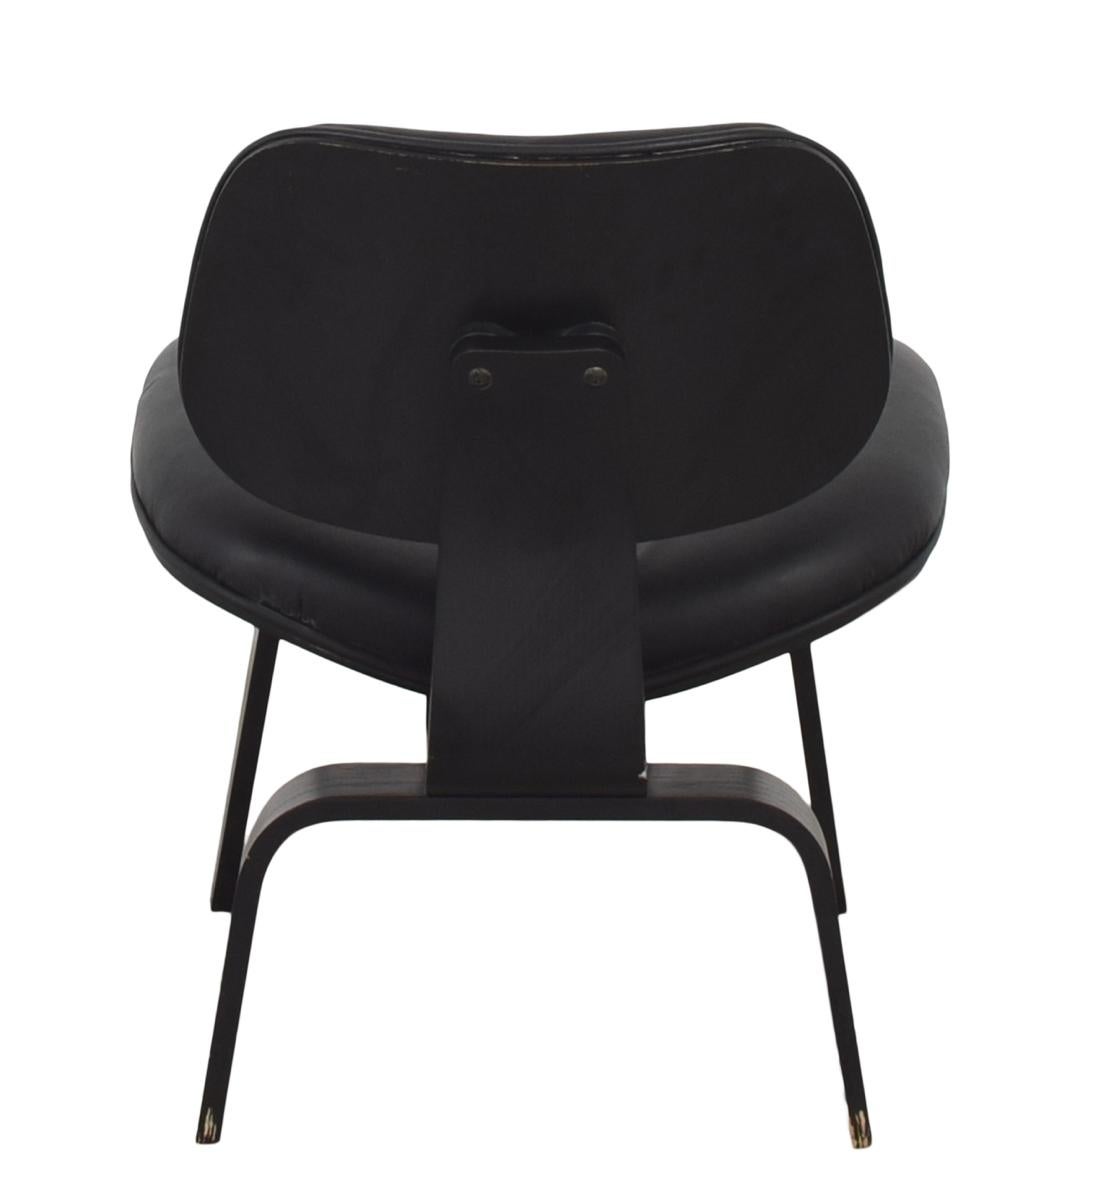 20th Century Charles, Ray Eames Molded Plywood Chair, Black Birch and Leather, Herman Miller